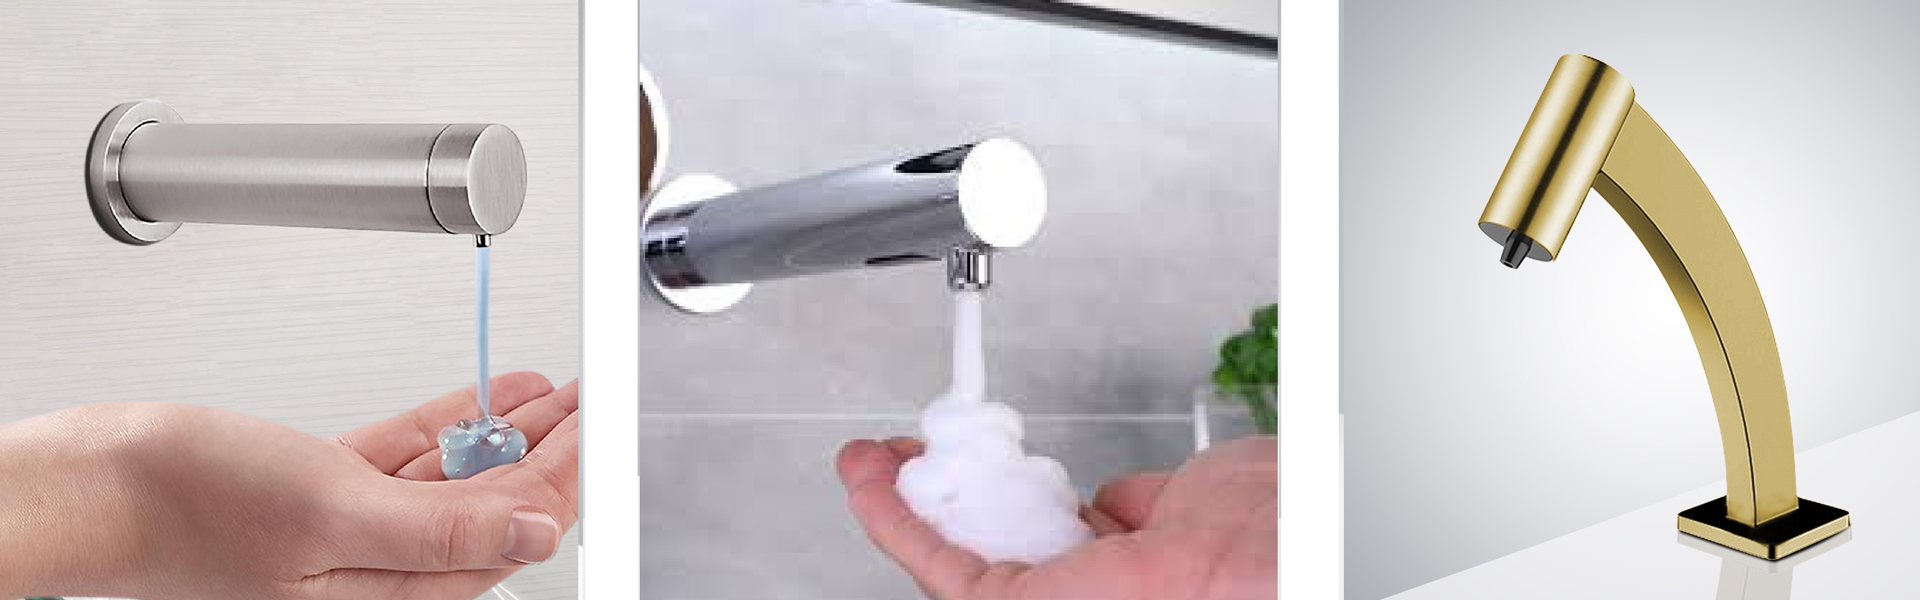 Common Issues with Automatic Foam Soap Dispenser